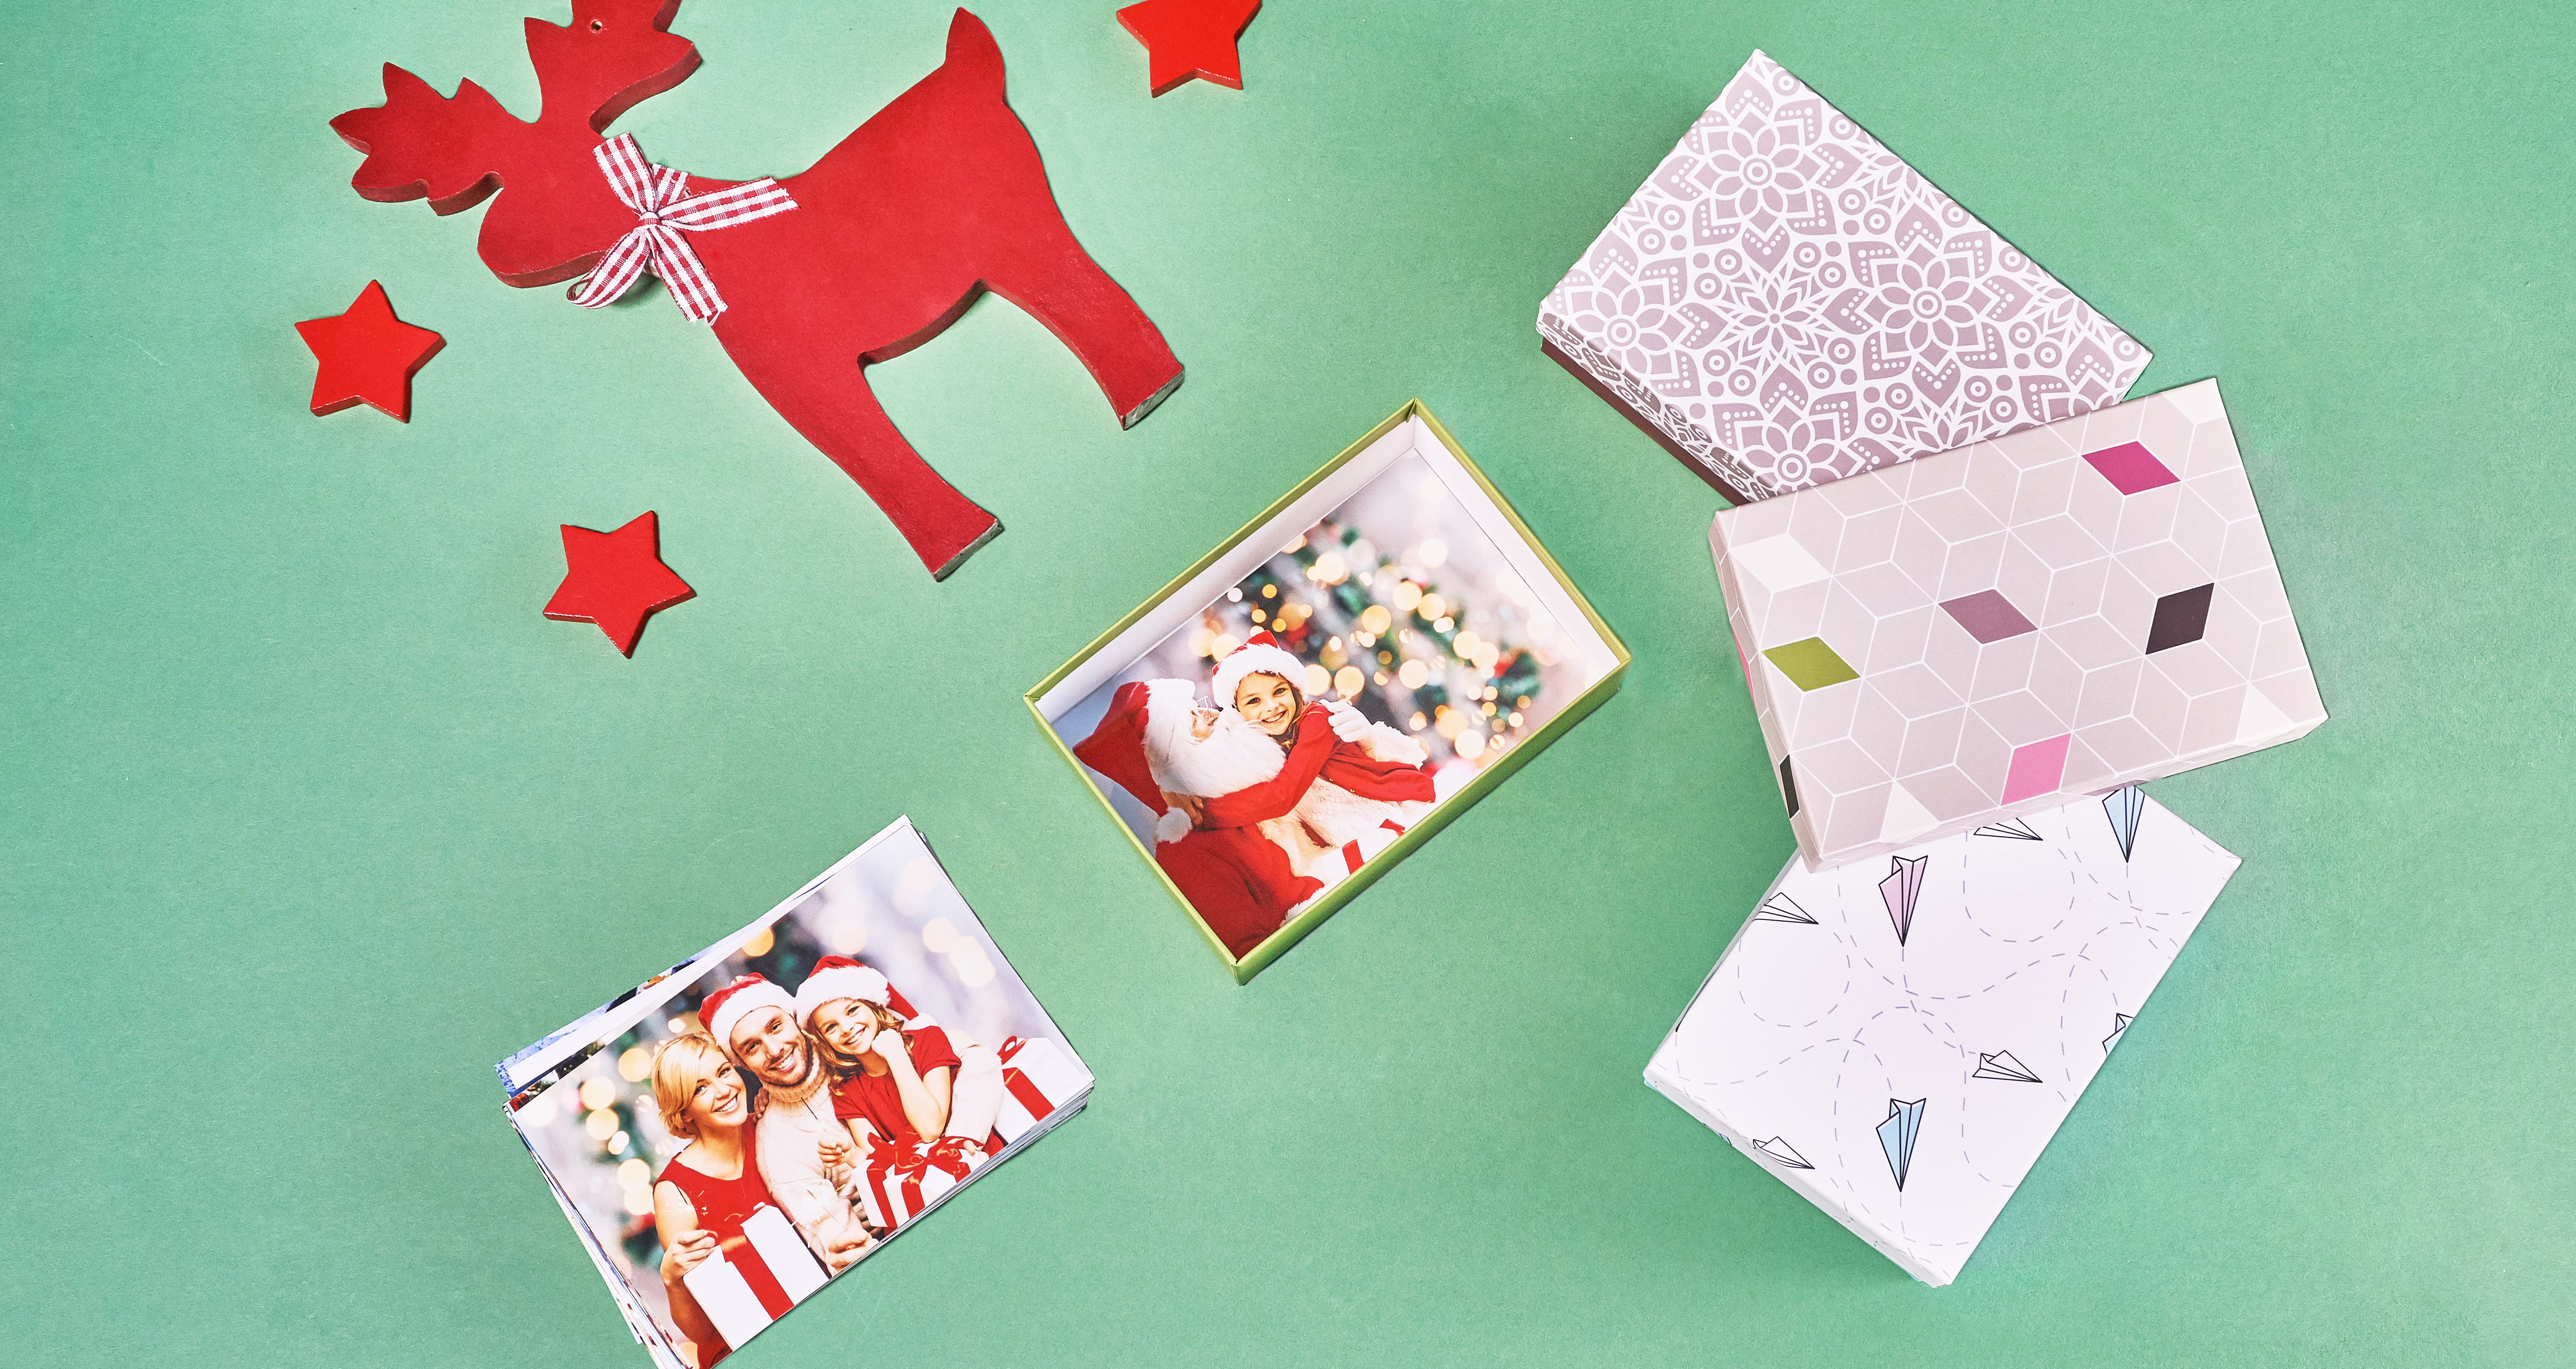 Classic prints in a decorative box and photos places in a pile. 3 decorative boxes for prints on the right side, a red wooden reindeer and stars above. All products are lying on the green background. 